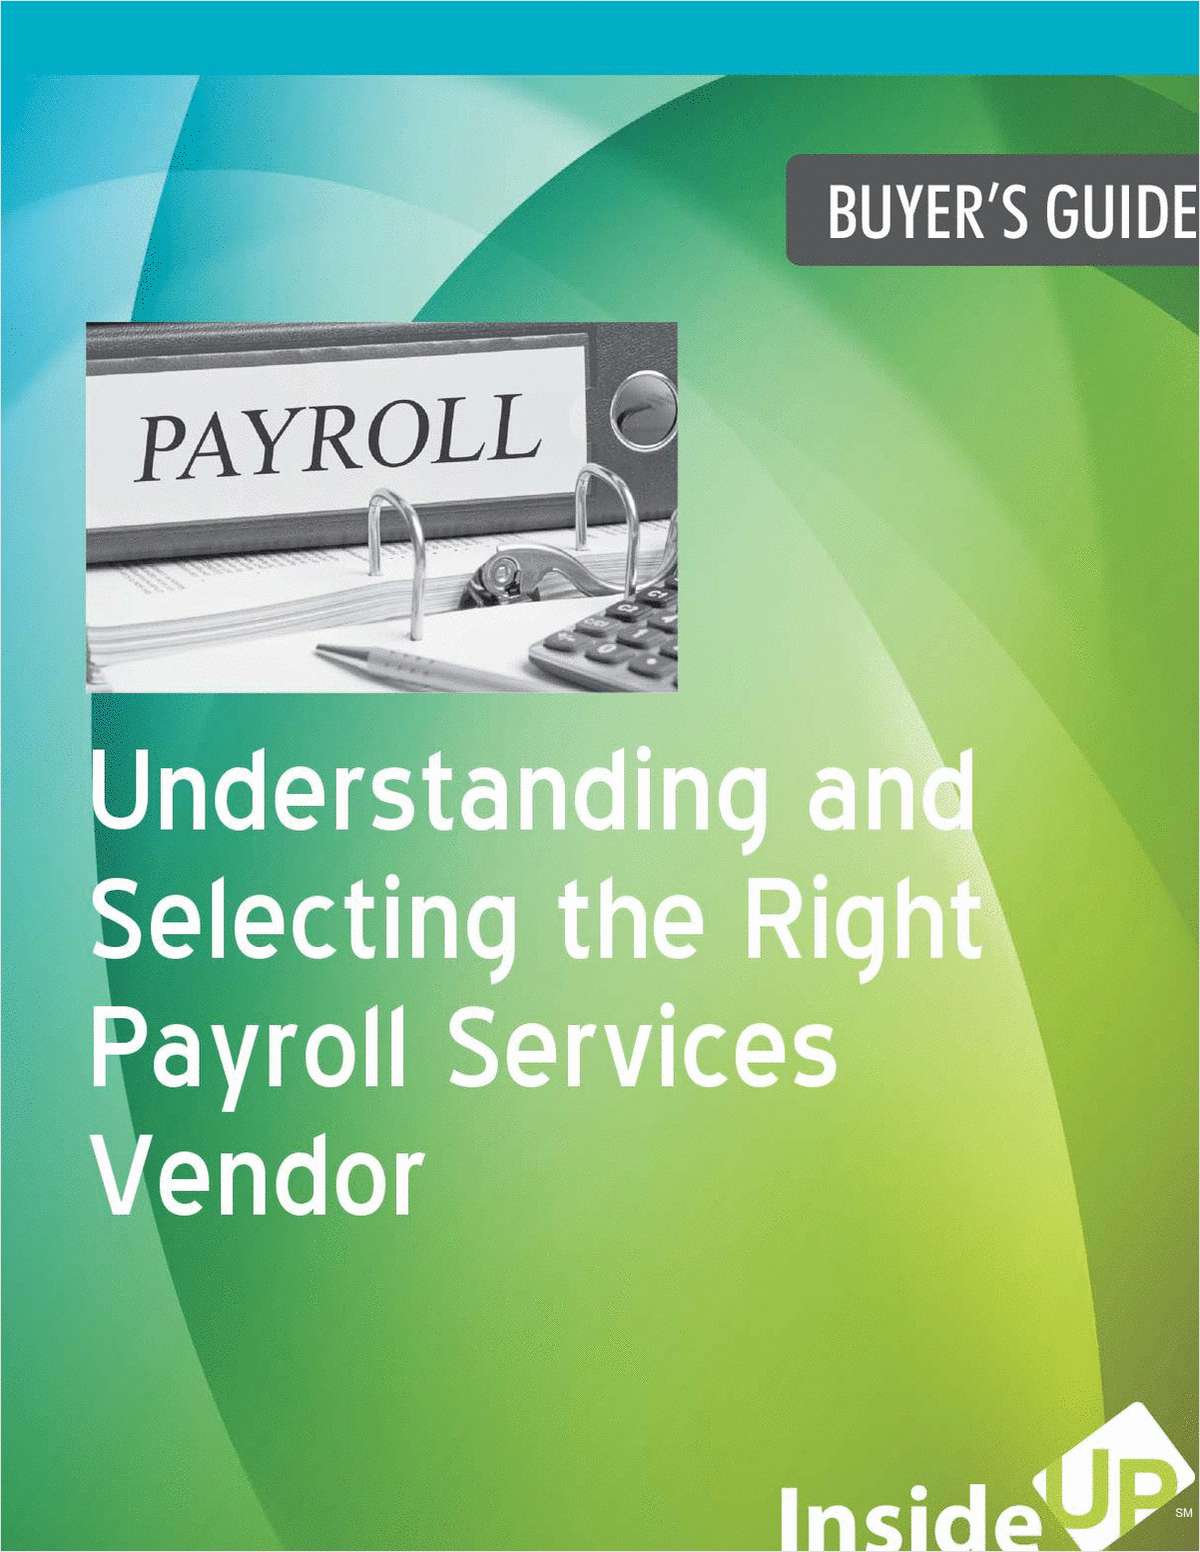 Free Guide on Understanding and Selecting the Right Payroll Services Vendor